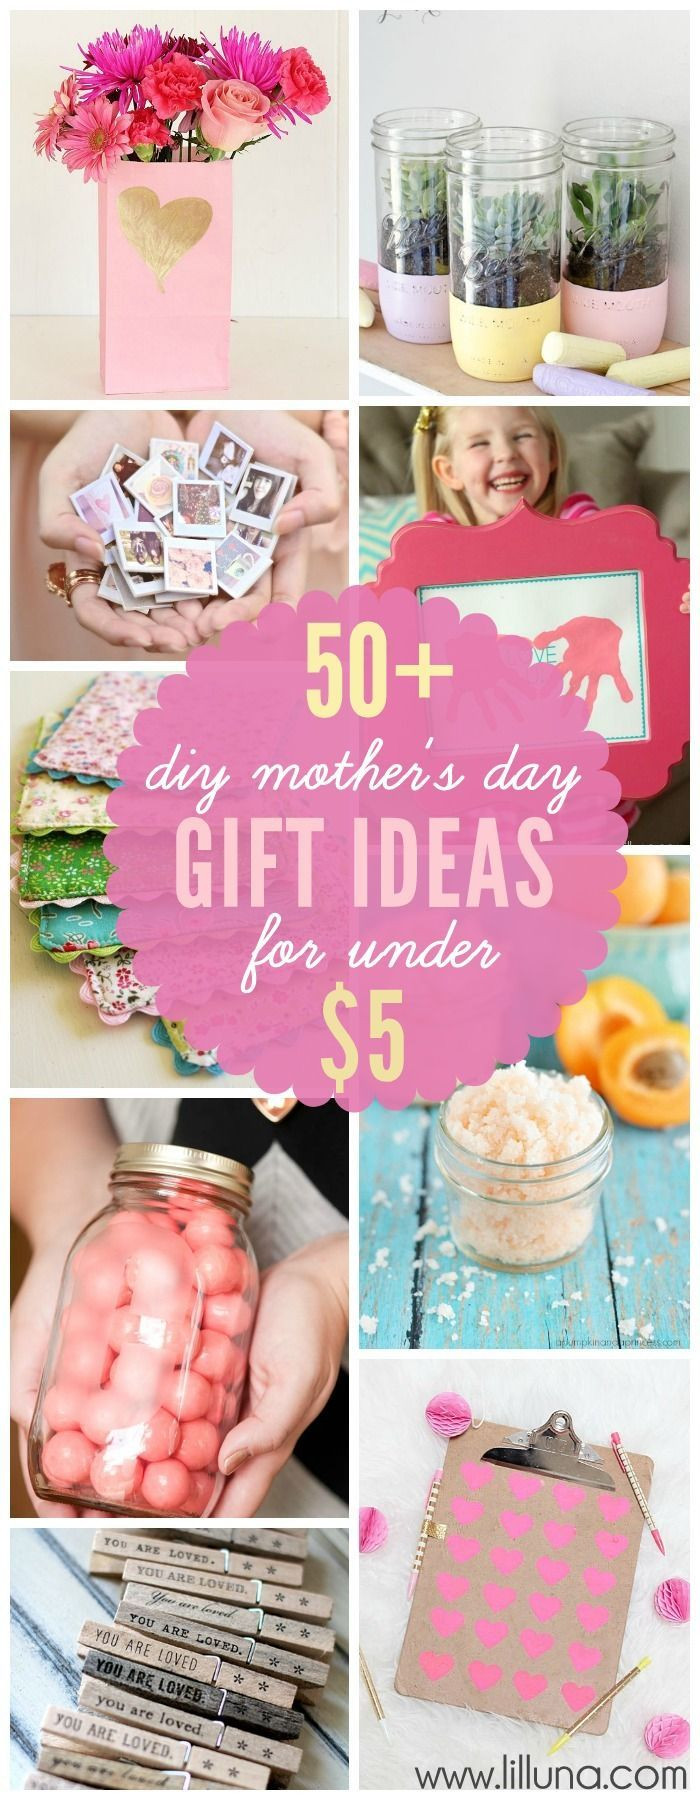 Mothers Day Gift Ideas Pinterest
 50 DIY Mother s Day Gift Ideas made for under $5